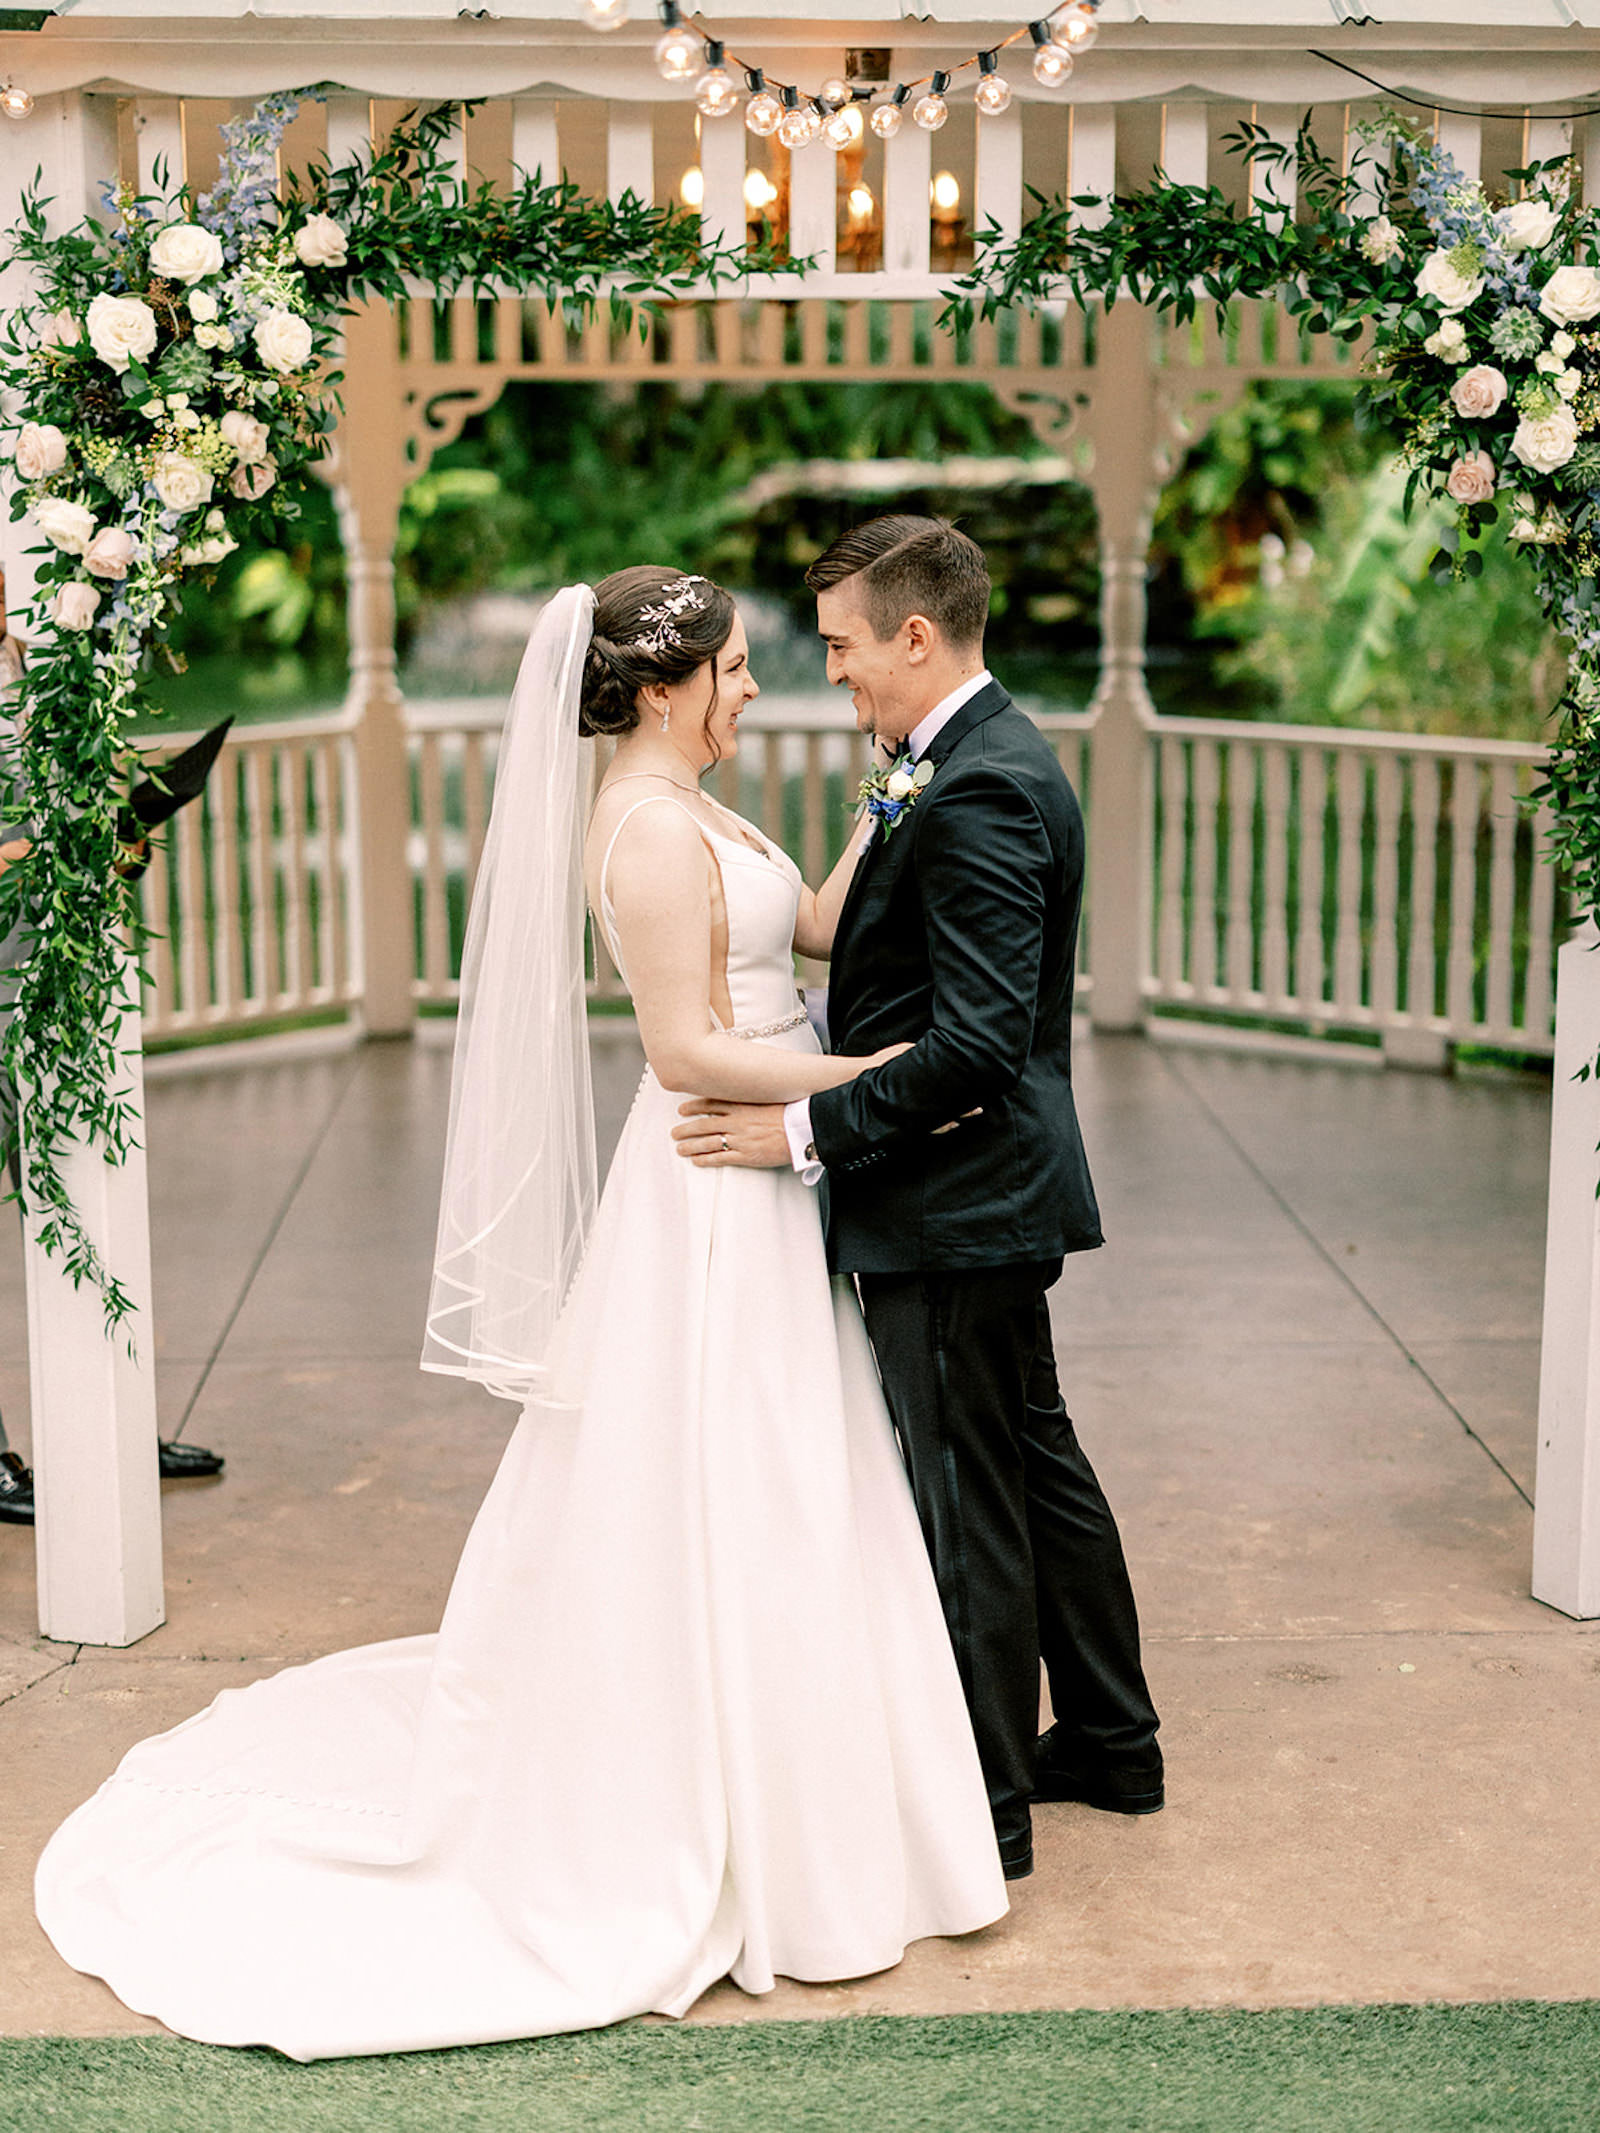 Intimate Bride and Groom Wedding Portrait | Gazebo Ceremony Ideas | Ruscus Greenery, Blue Snapdragon, Succulant, Pink and White Rose Flower Arrangement Altar Decor Ideas | Tampa Bay Videographer Shannon Kelly Films